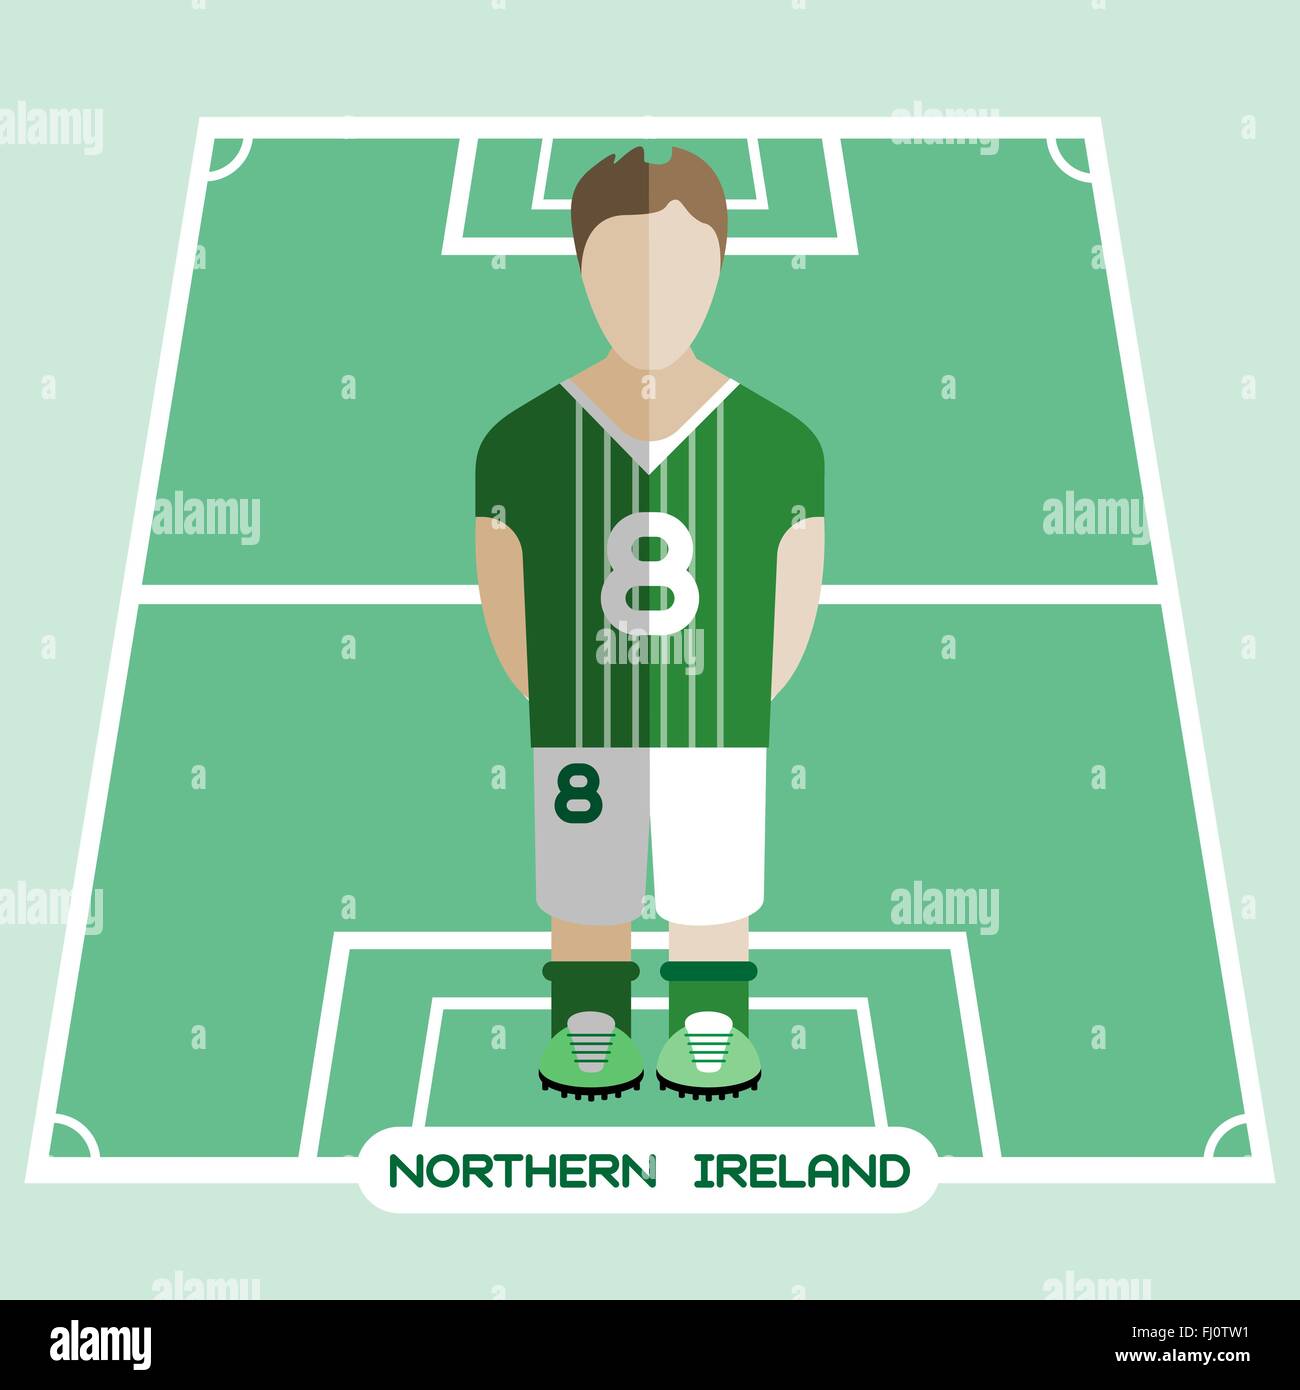 Football Soccer Player silhouette isolated on the play field. Computer game Northern Ireland Football club player. Stock Vector